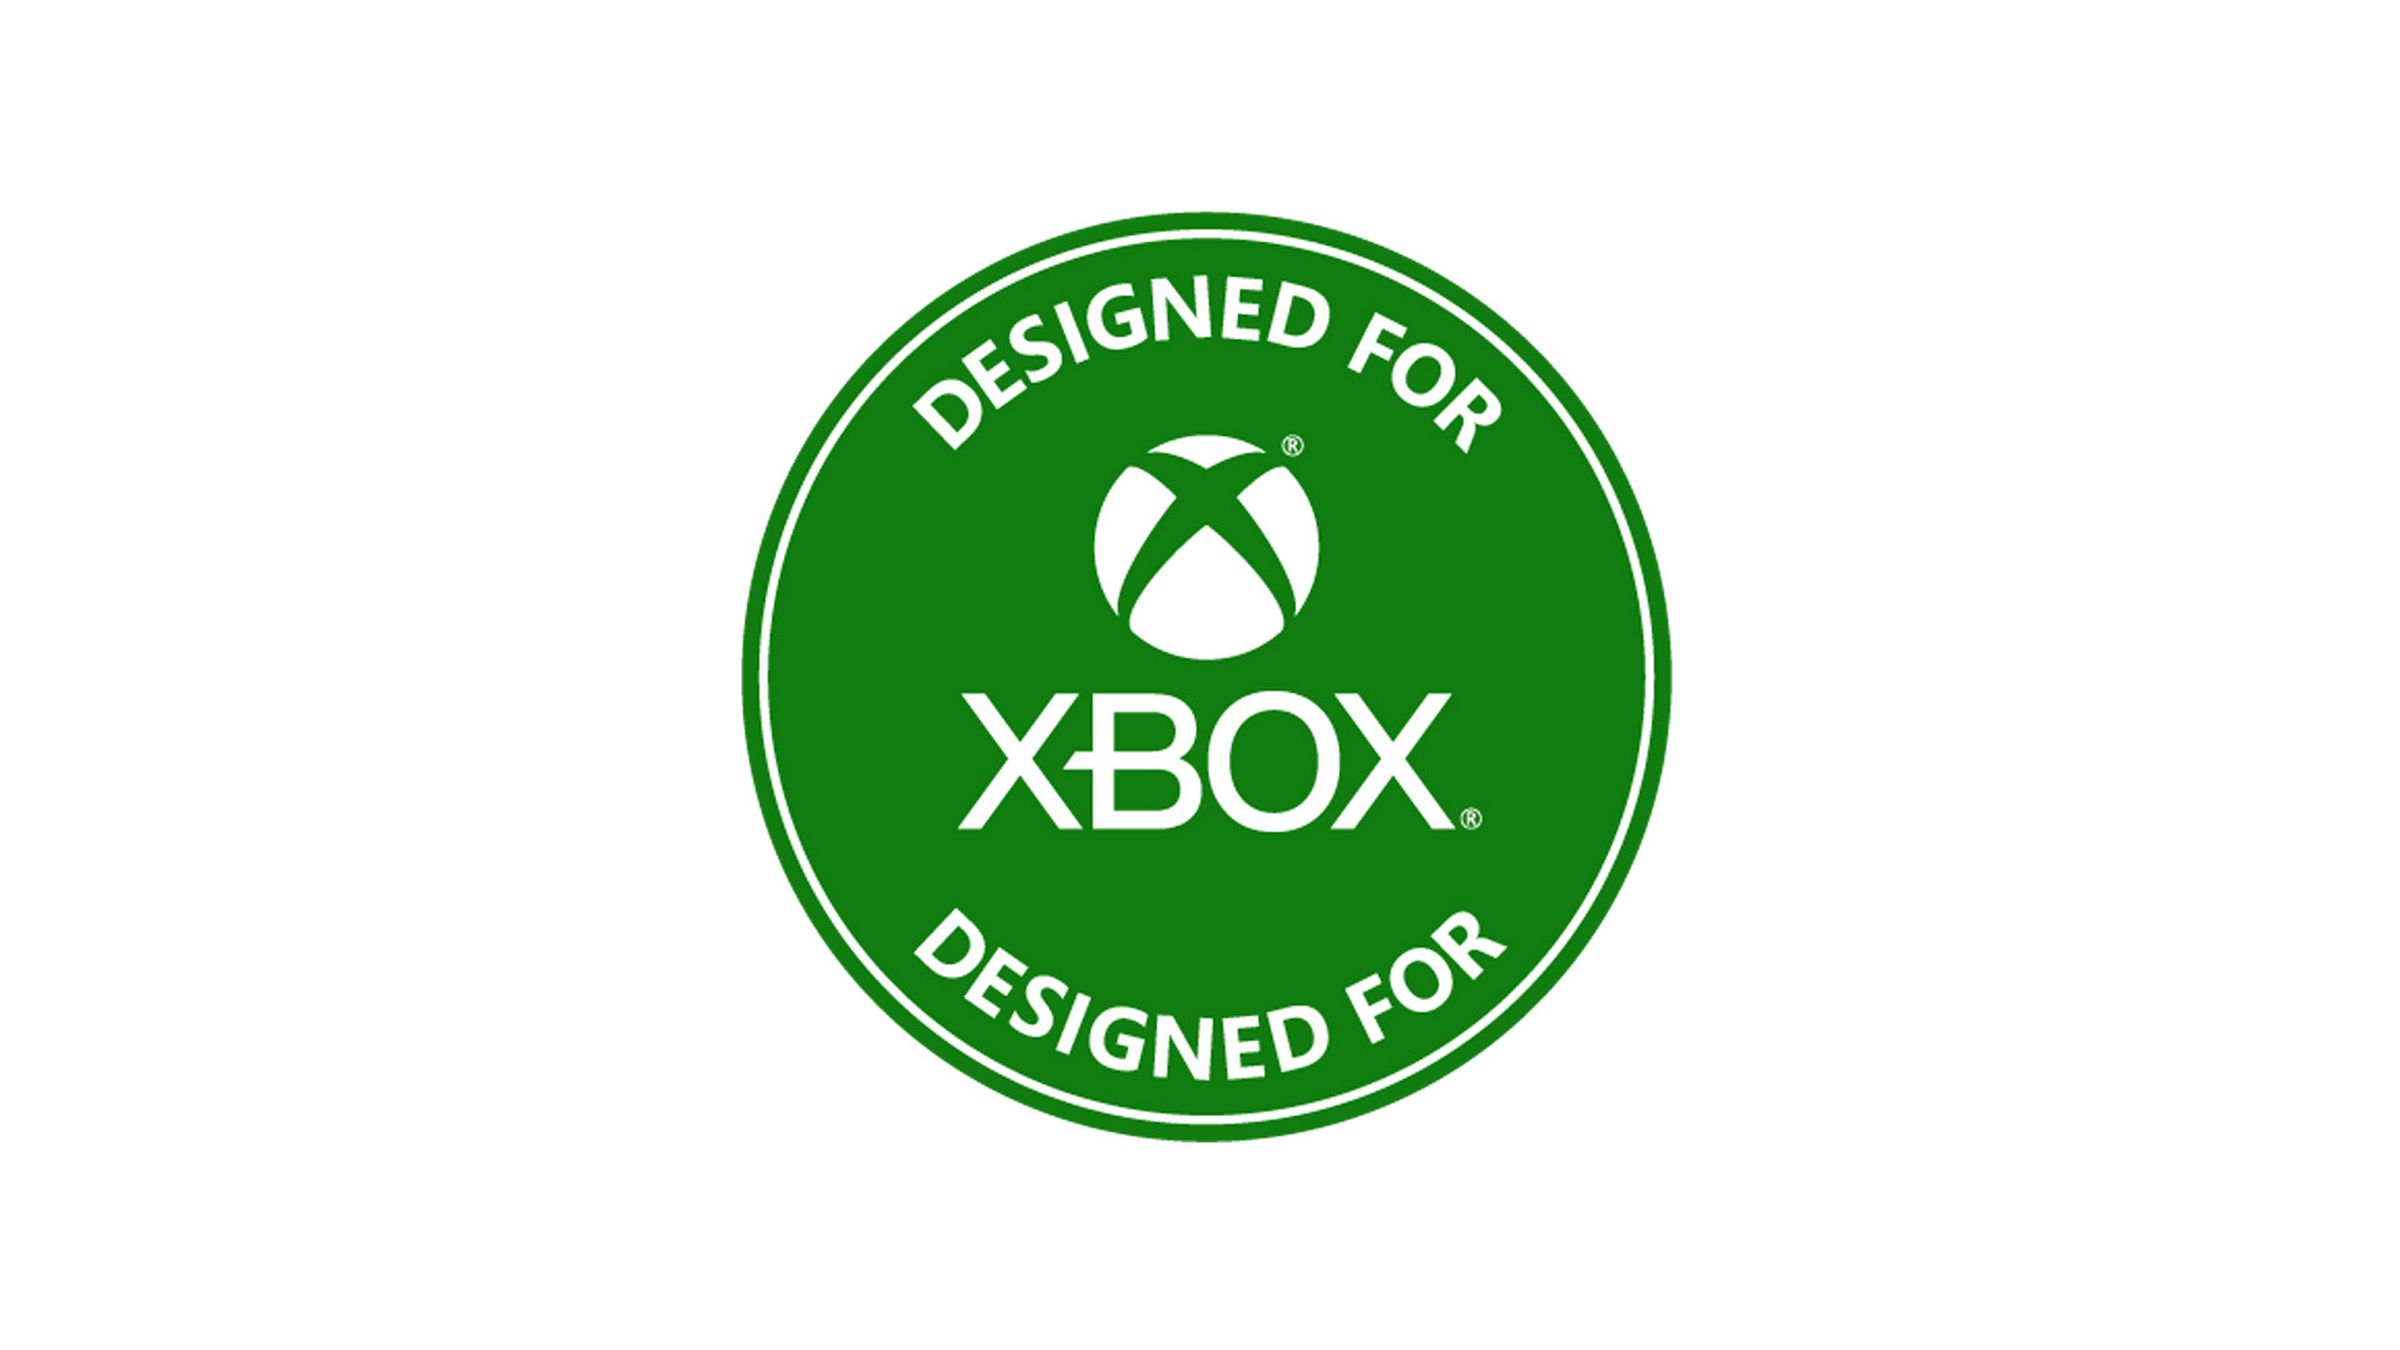 Controllers and accessories with the designed for Xbox logo are unaffected.